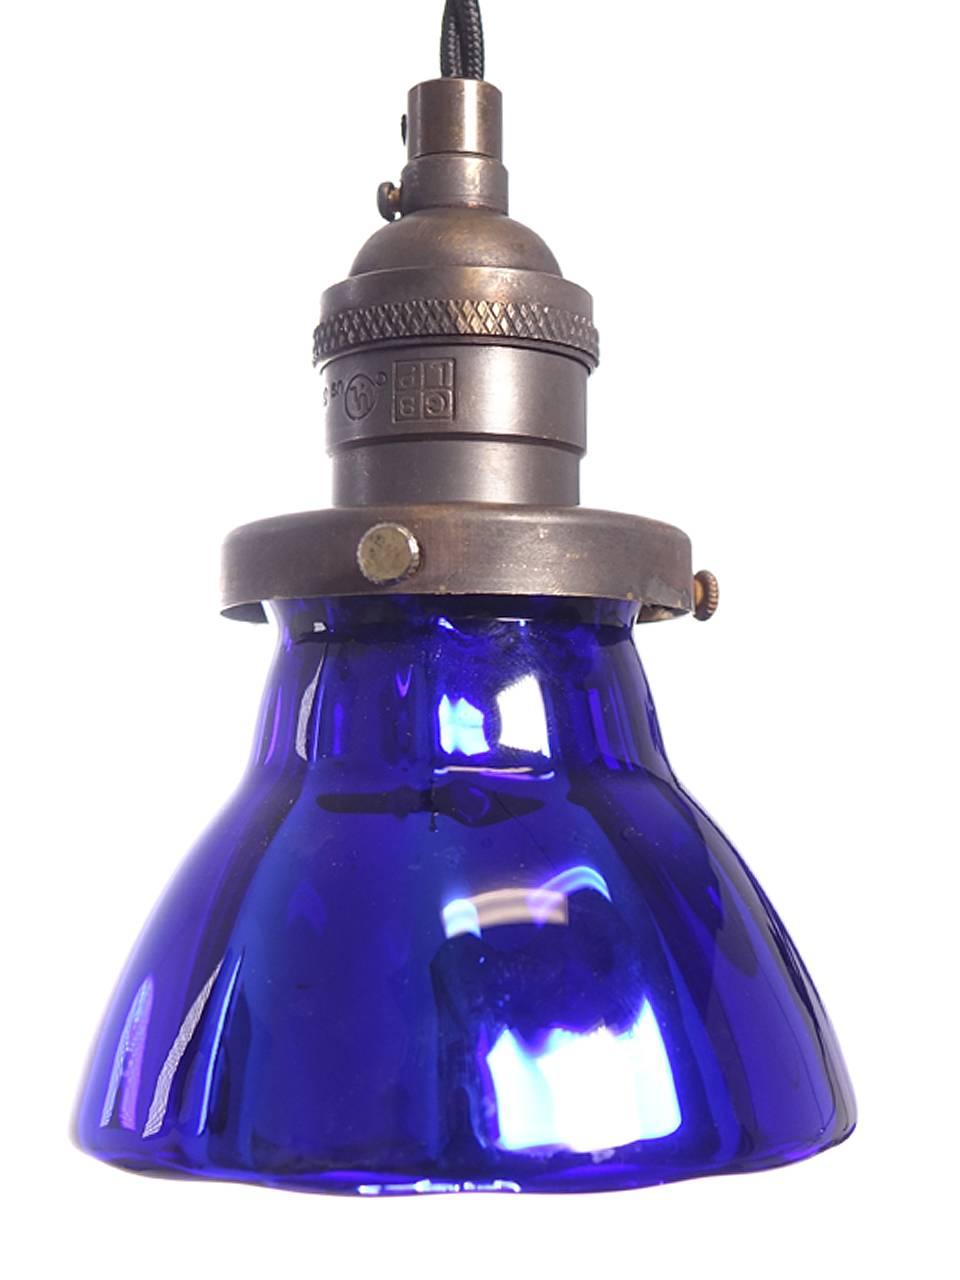 These deep blue pendants are small but striking. They are hollow handblown blue glass that is mirrored inside. It has a subtle panelled shape that nicely catches the light. These are perfect hung in groups. These lamp shades were a short limited